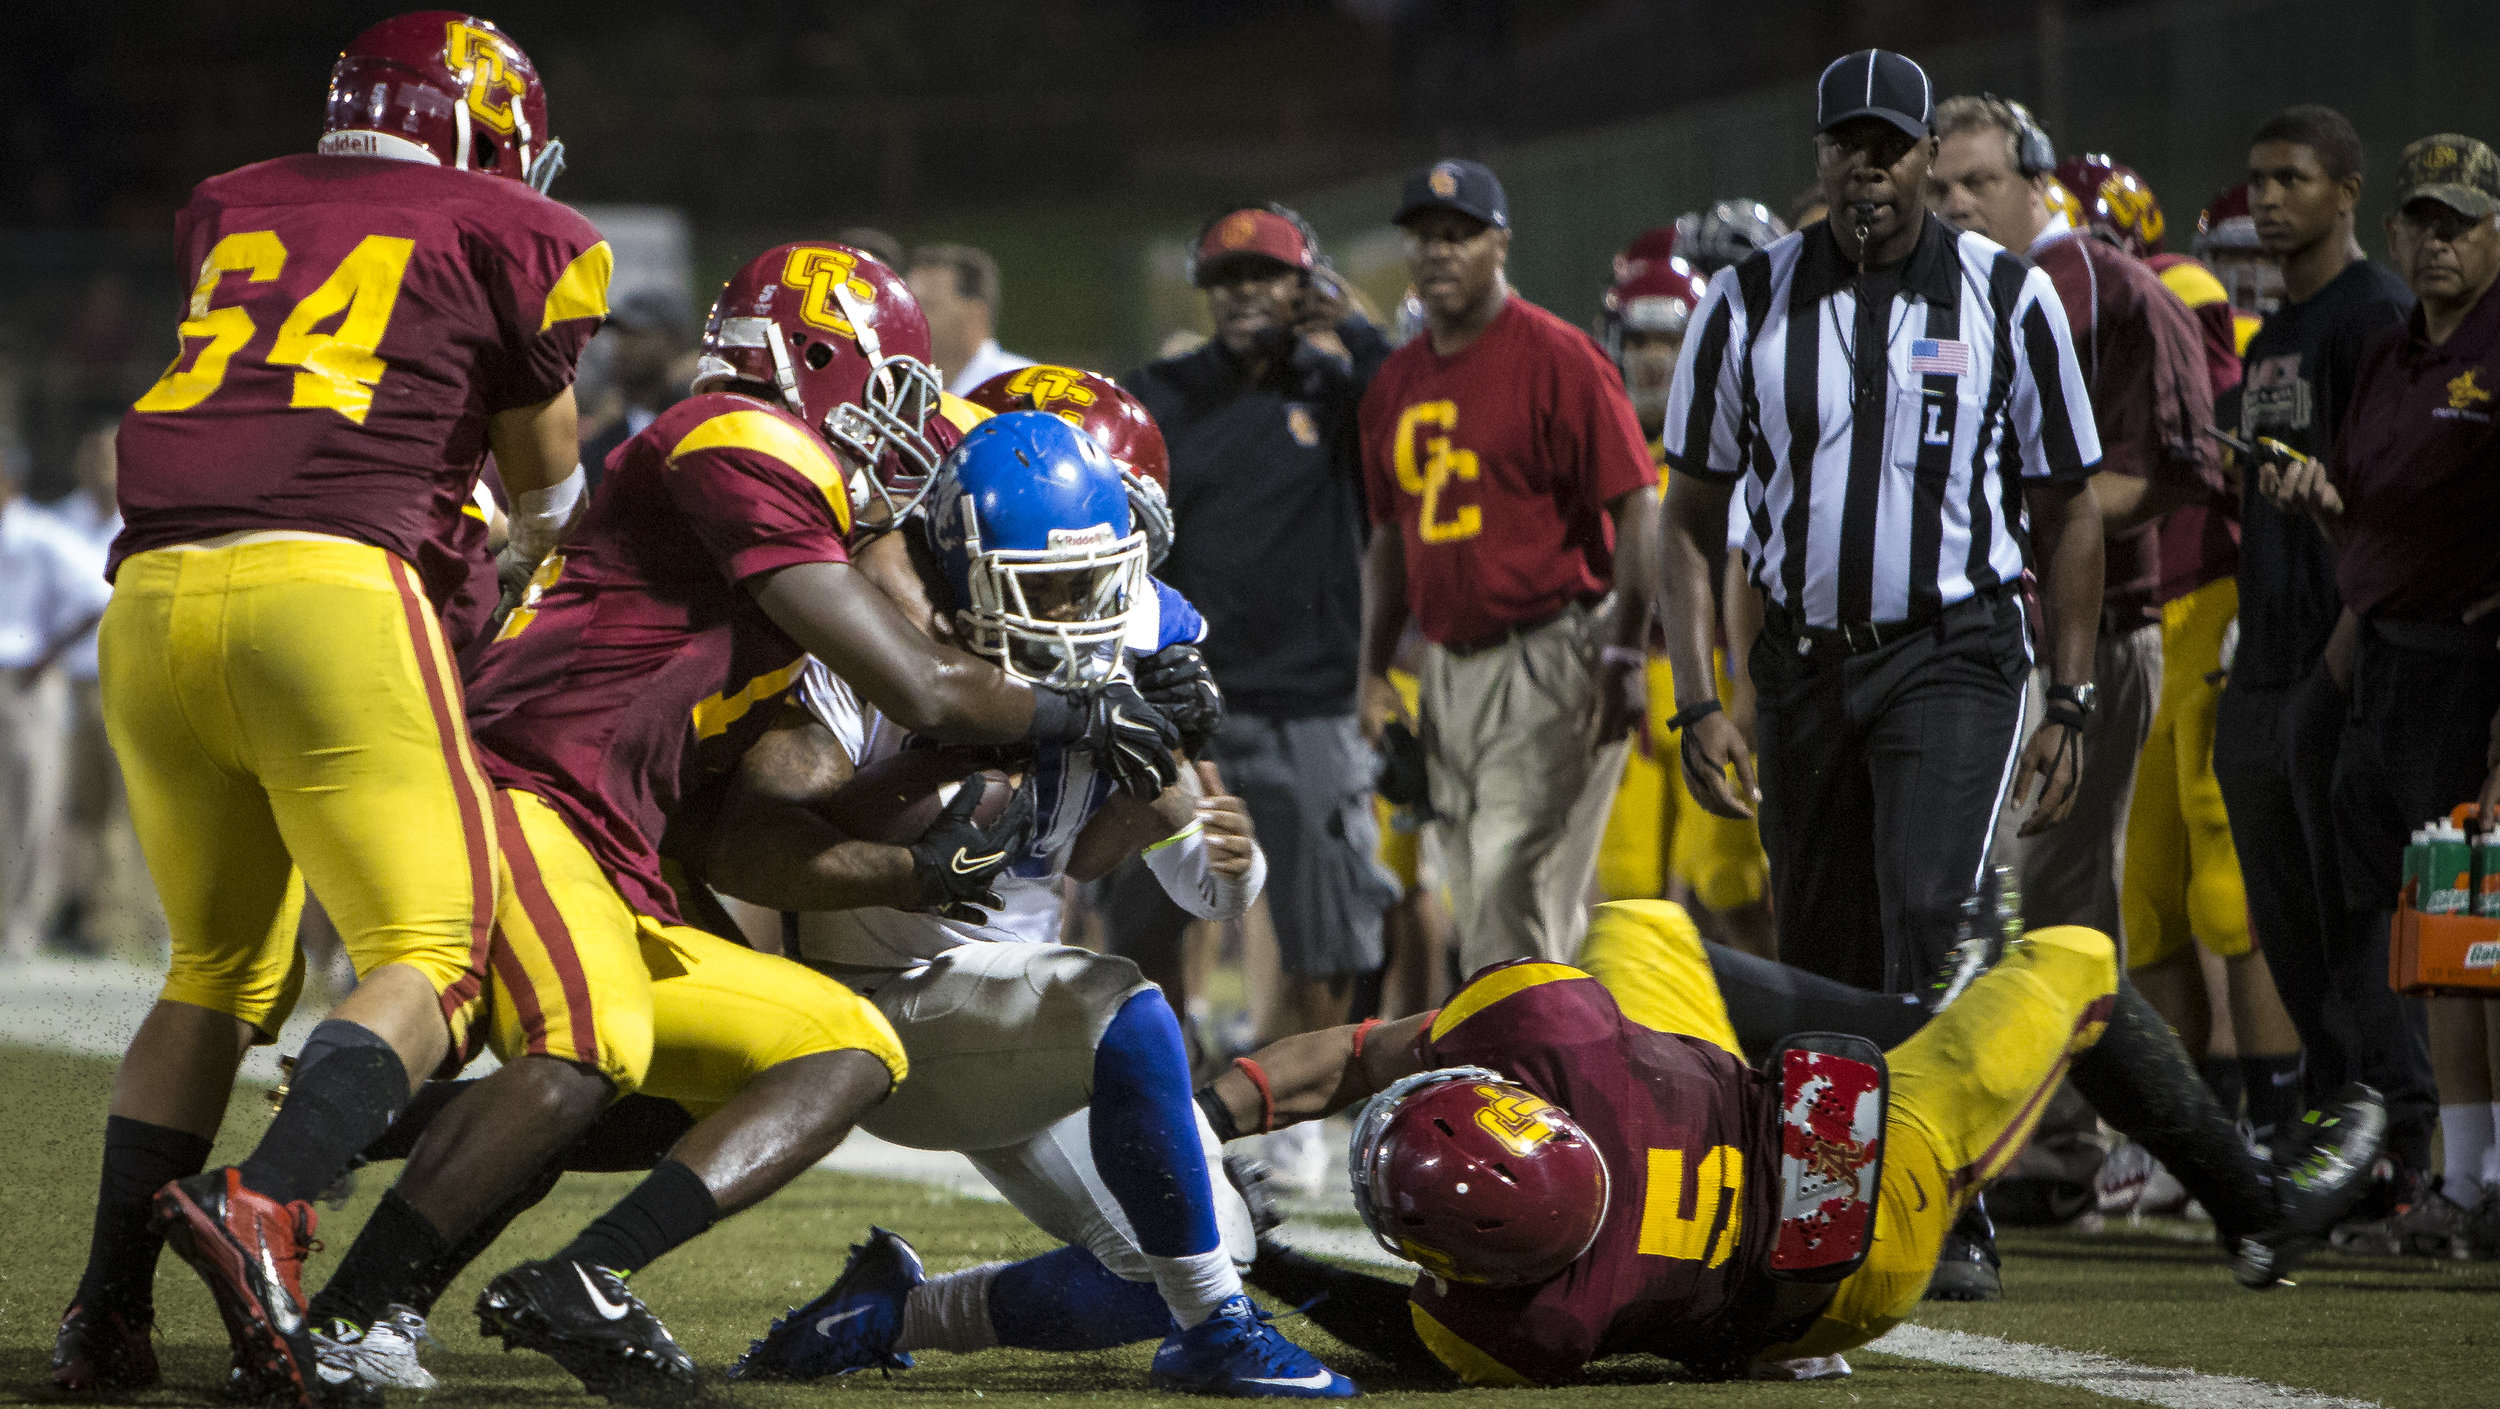  The Santa Monica College Corsairs men's football team sophmore running back #20 Rojer Jones (blue,center) ran for 22 yards on this play before this huge tackle from The Glendale College Vaquero's in an away game in Glendale, Calif. on October, 3rd 2